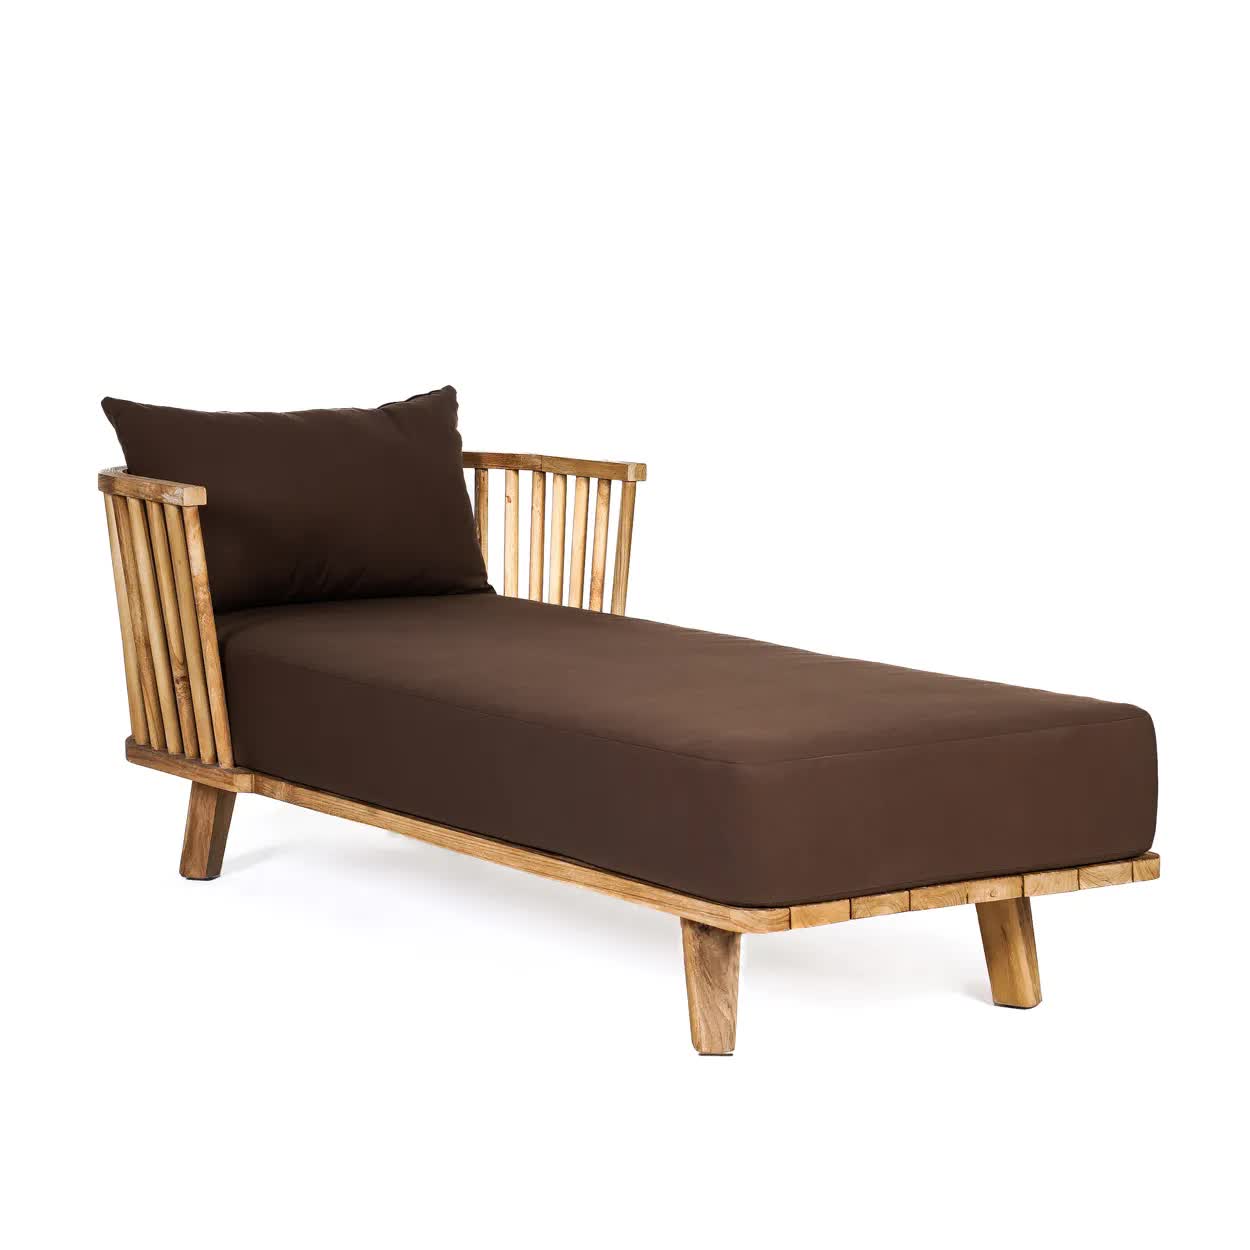 THE MALAWI Daybed Natural Chocolate